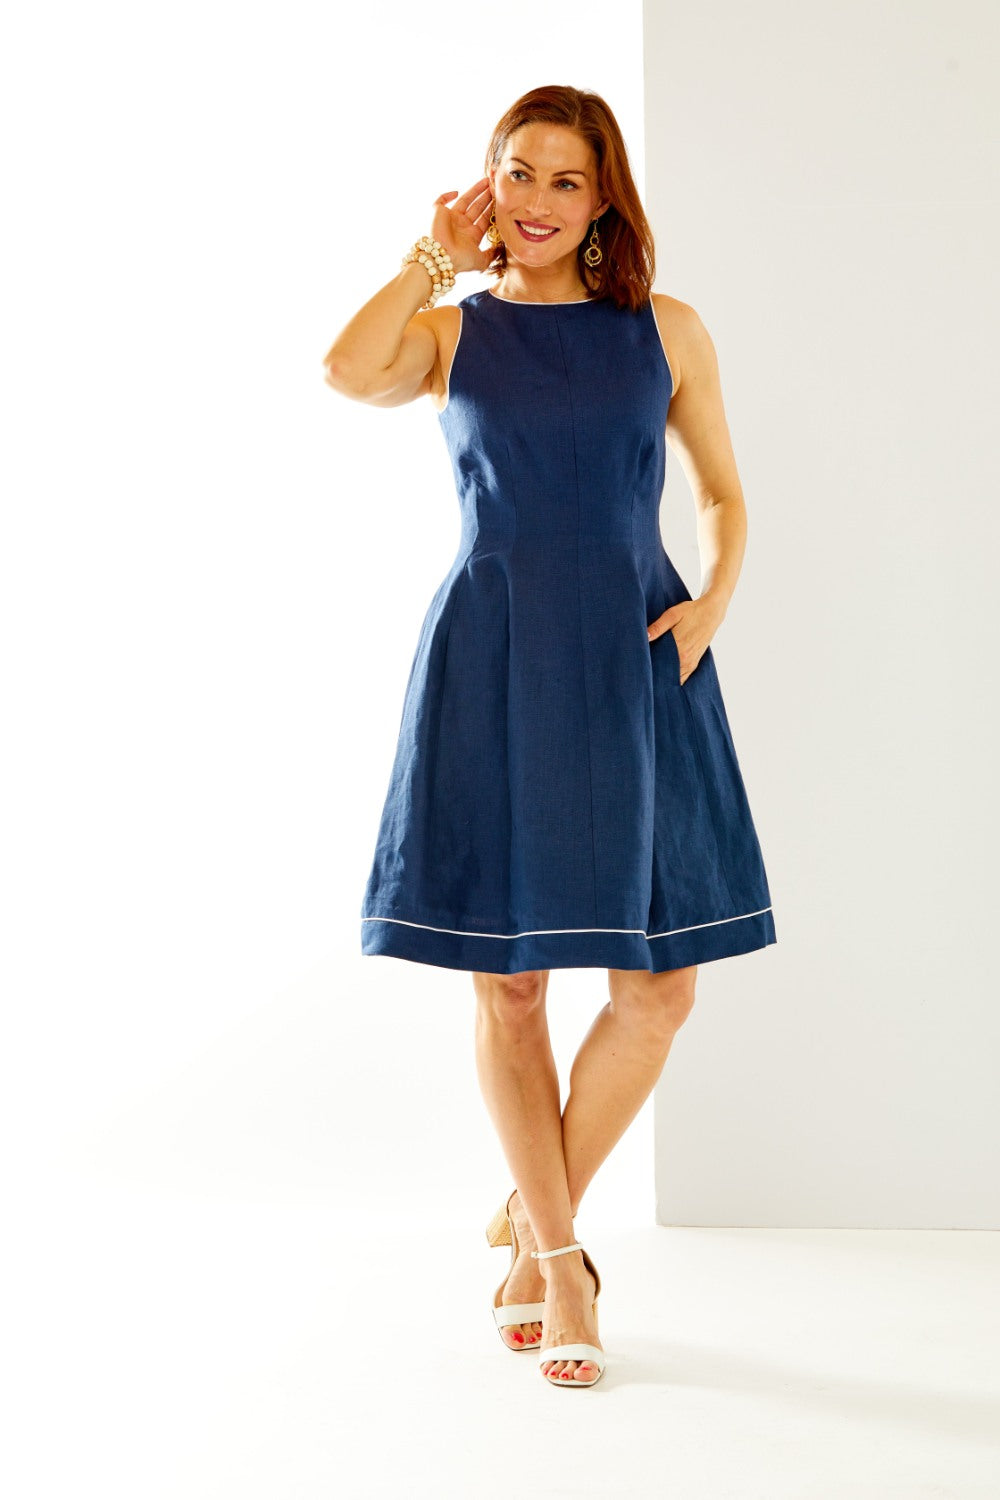 Woman in navy dress with white piping